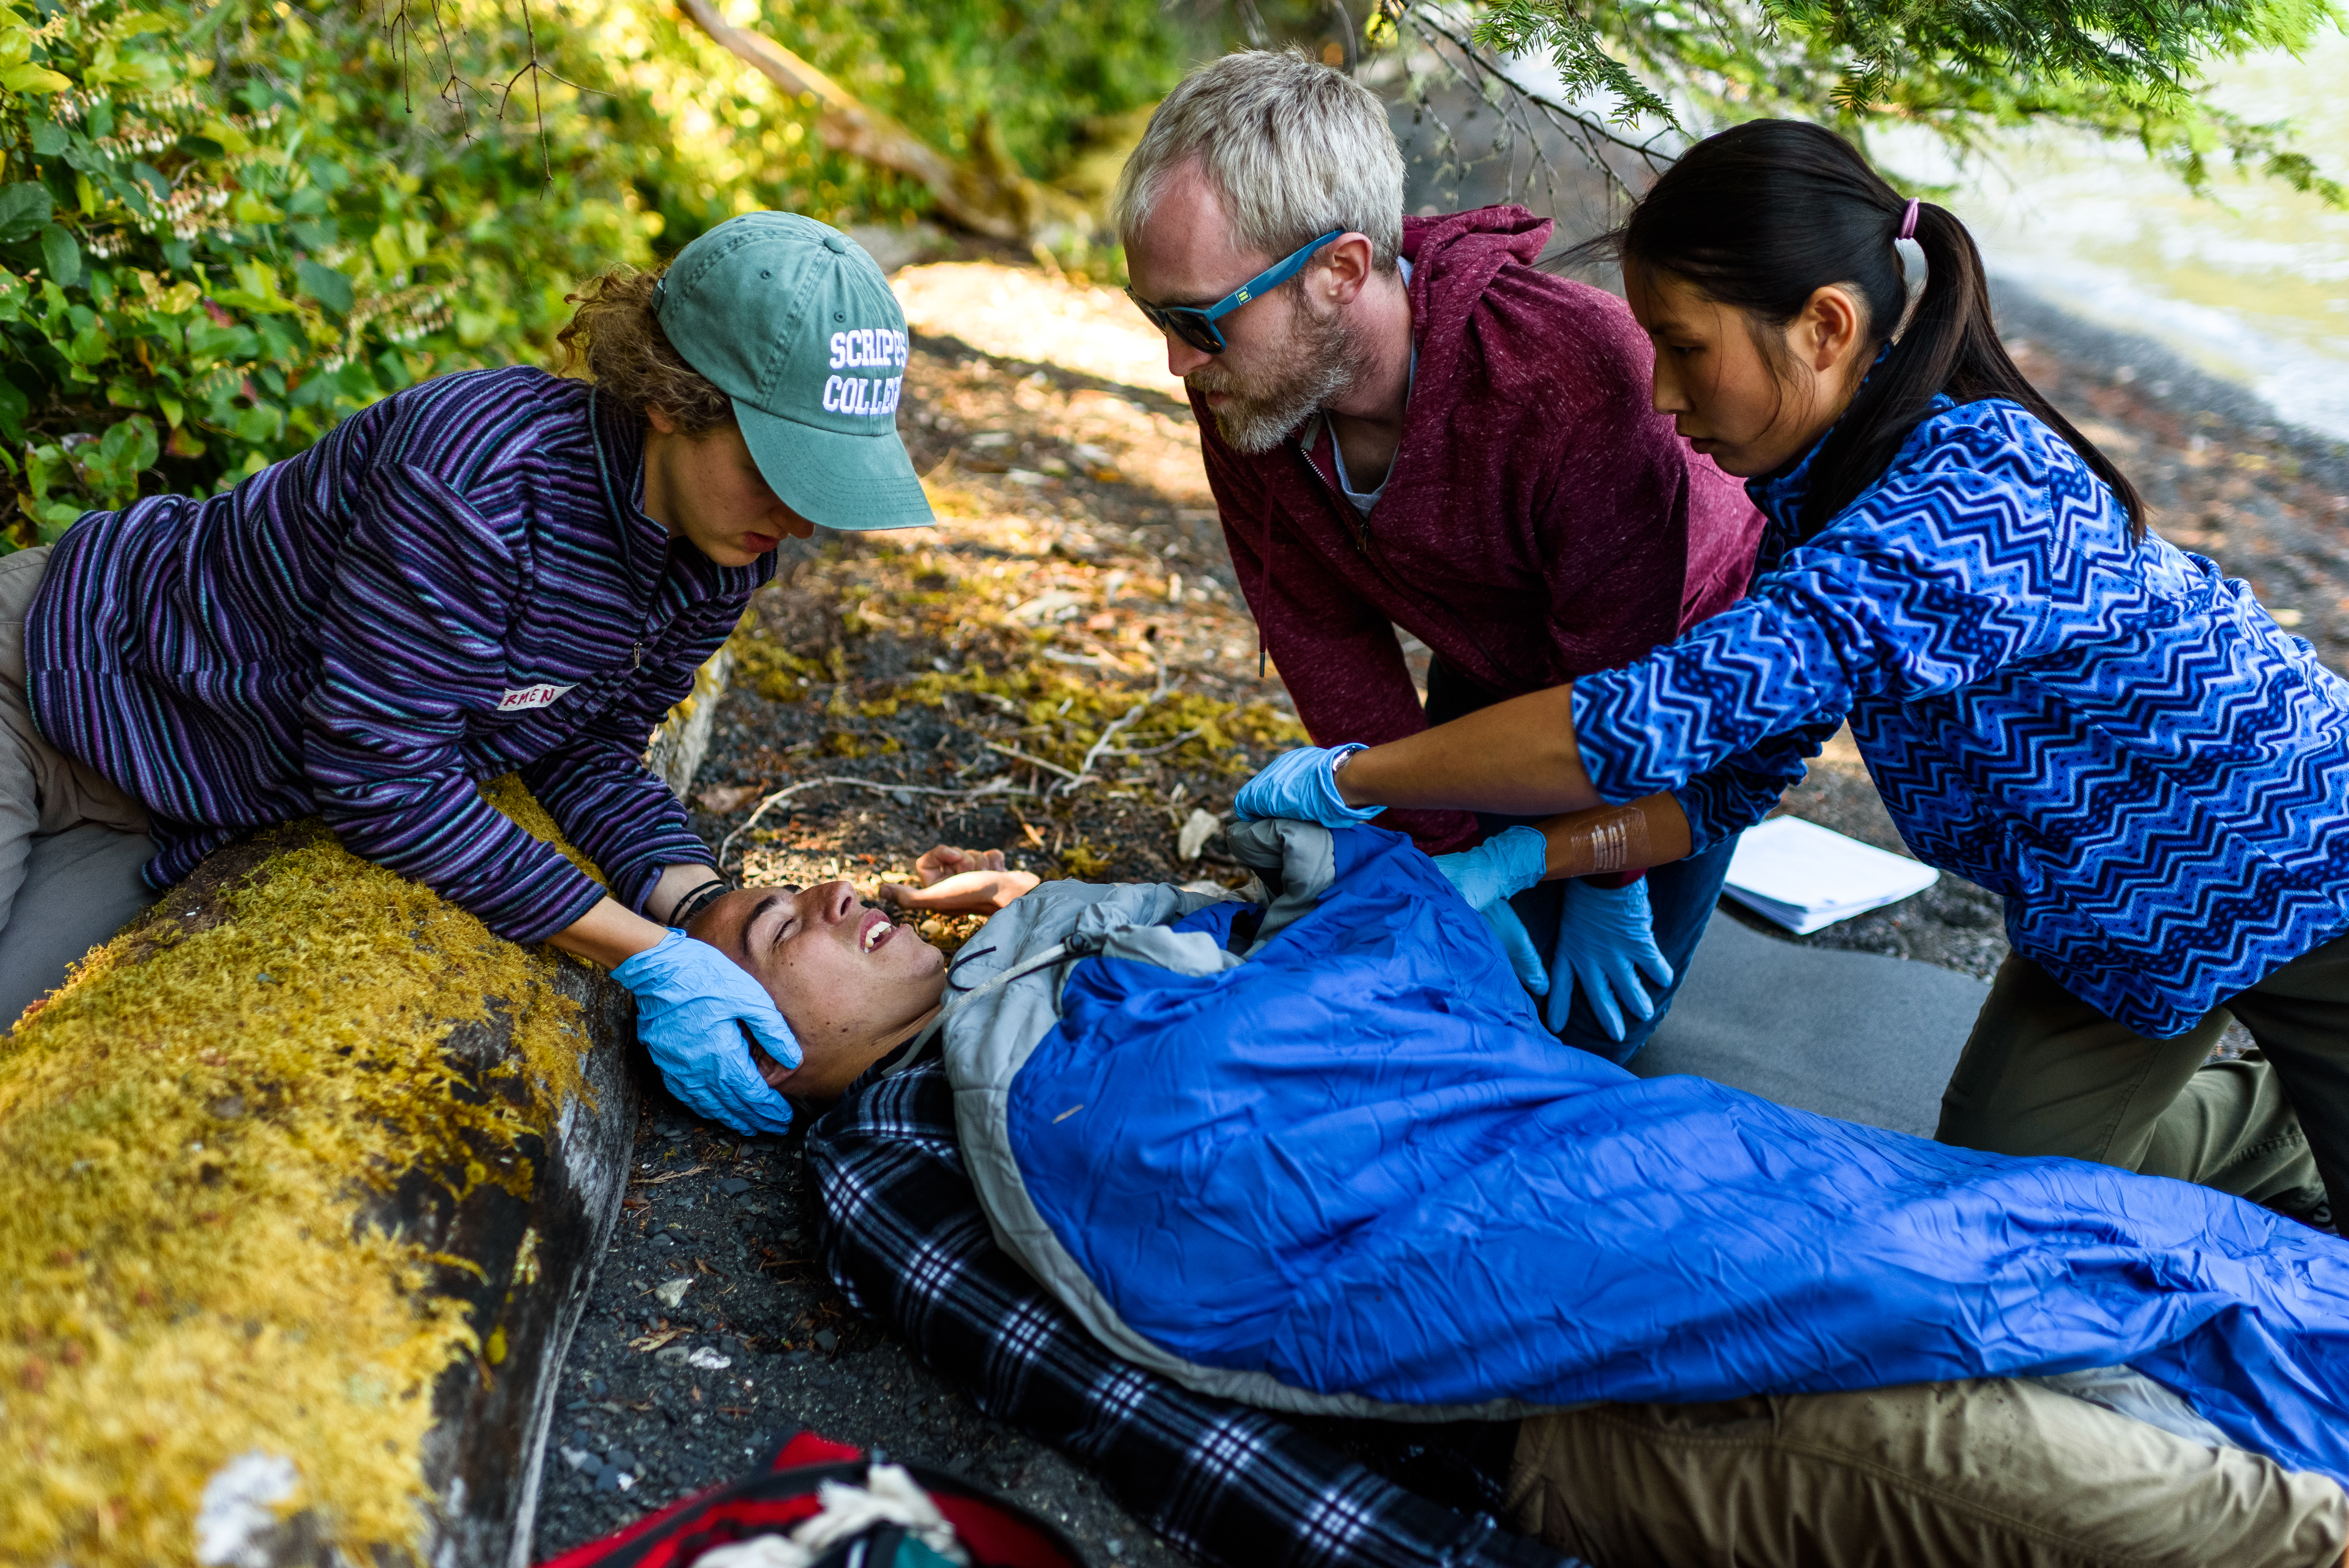 A group of three rescuers wrap a hypothermic patient into a sleeping bag to create a hypothermia wrap. They are in a forrest.